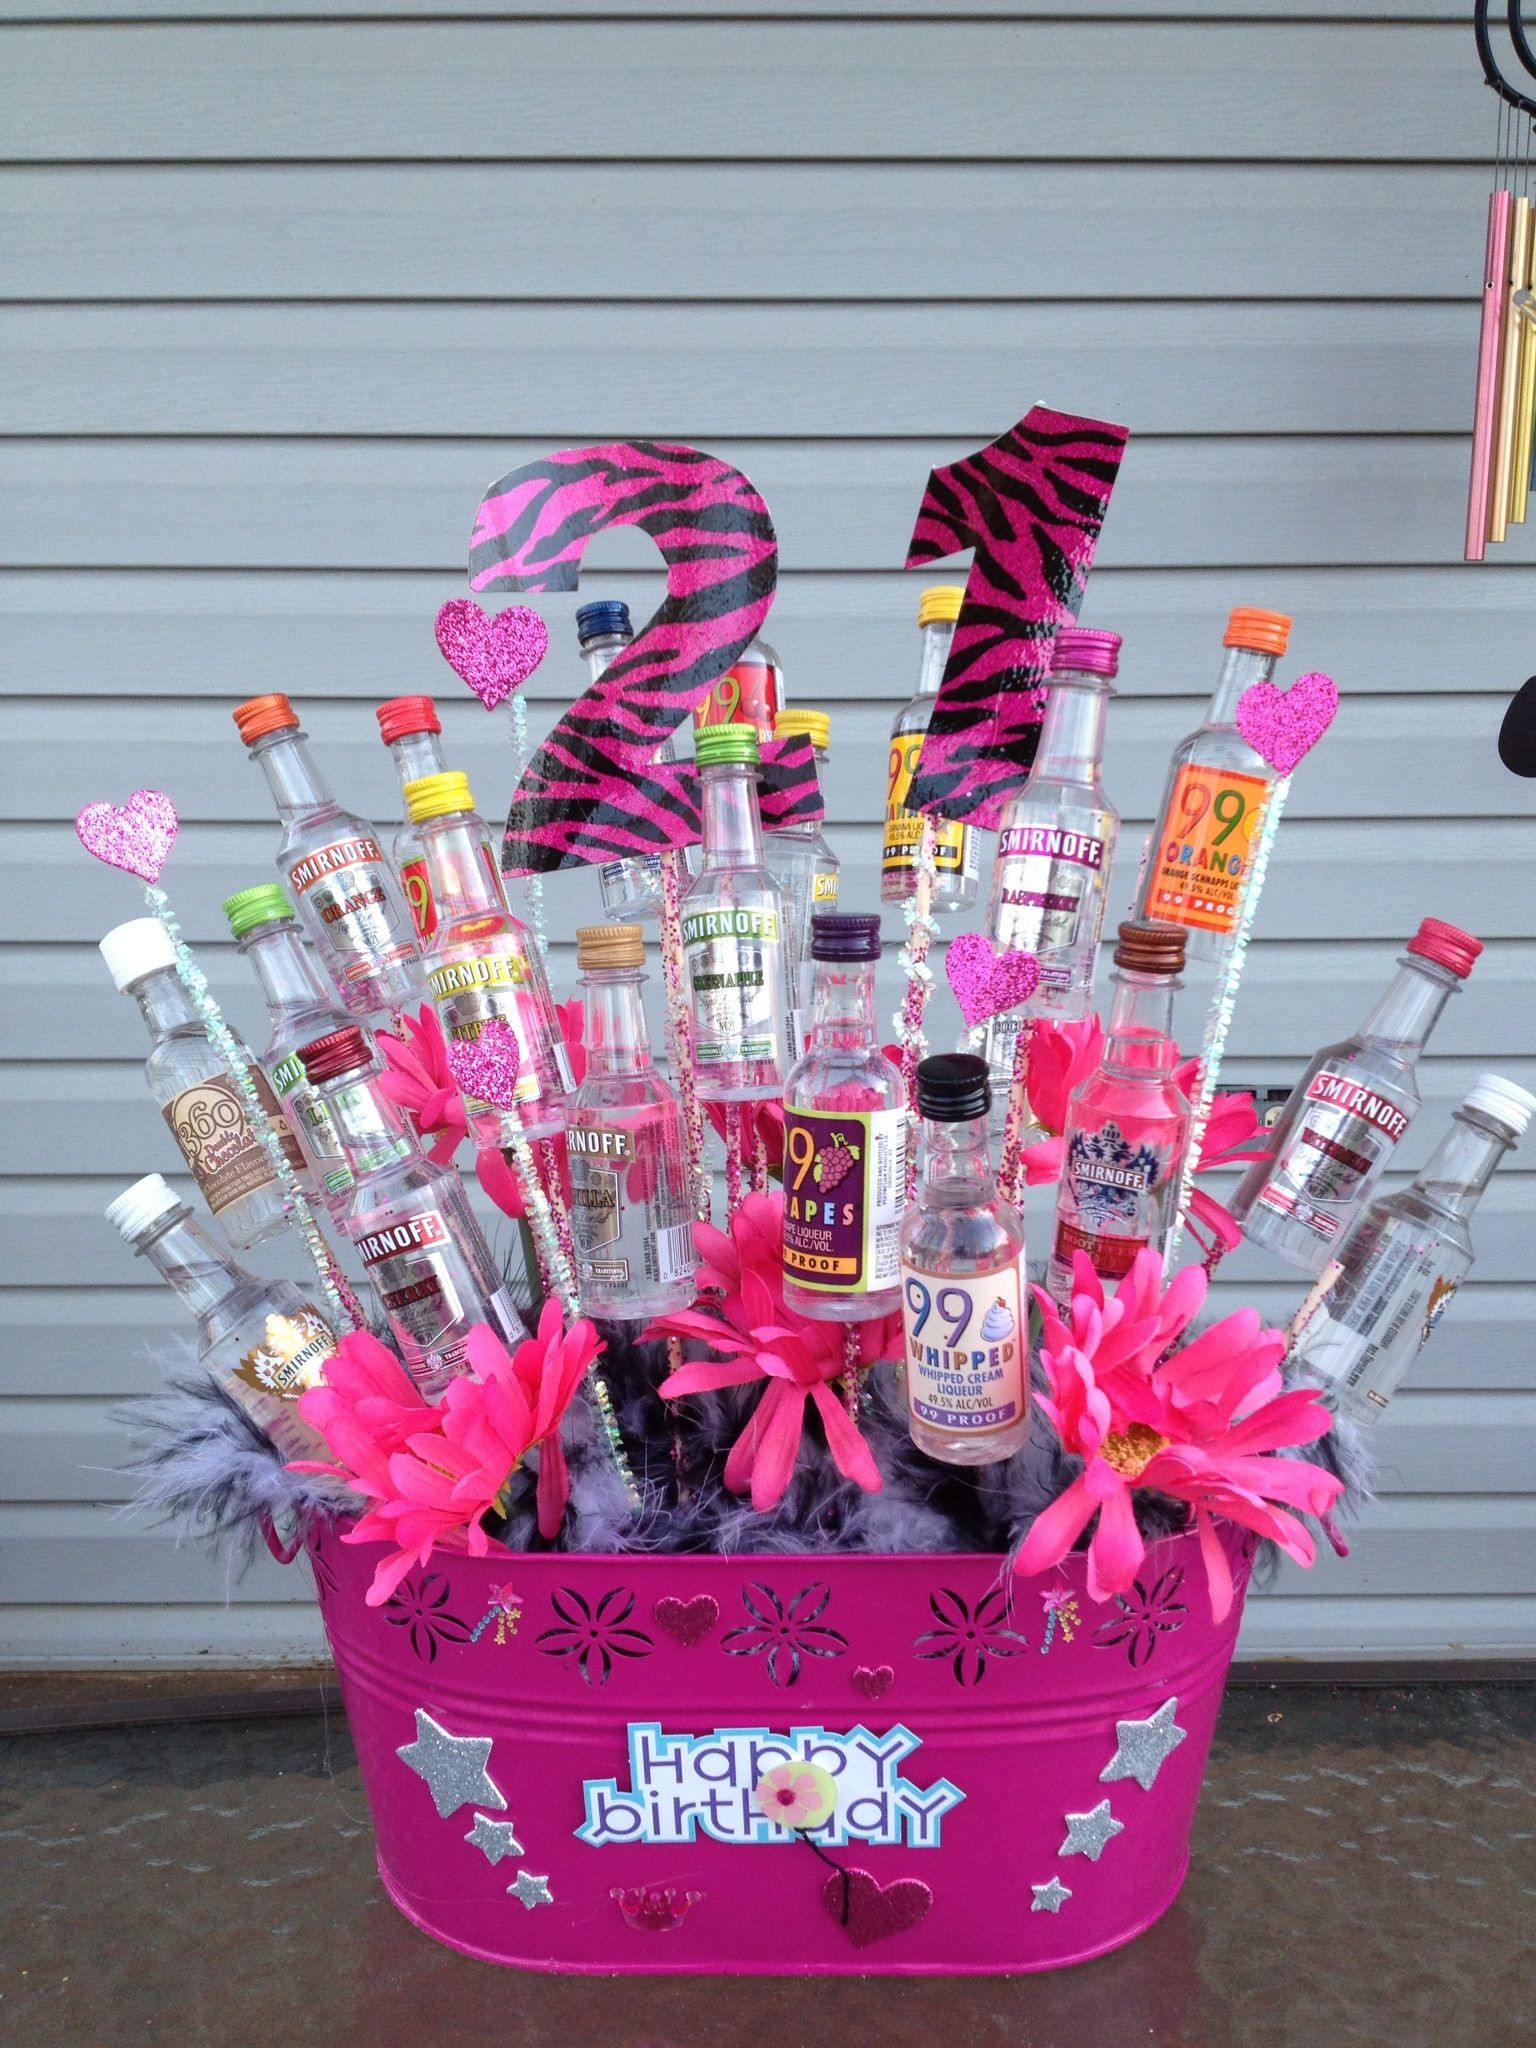 21st Birthday Gift Baskets For Her
 Great t idea easy to make 21st Birthday t idea